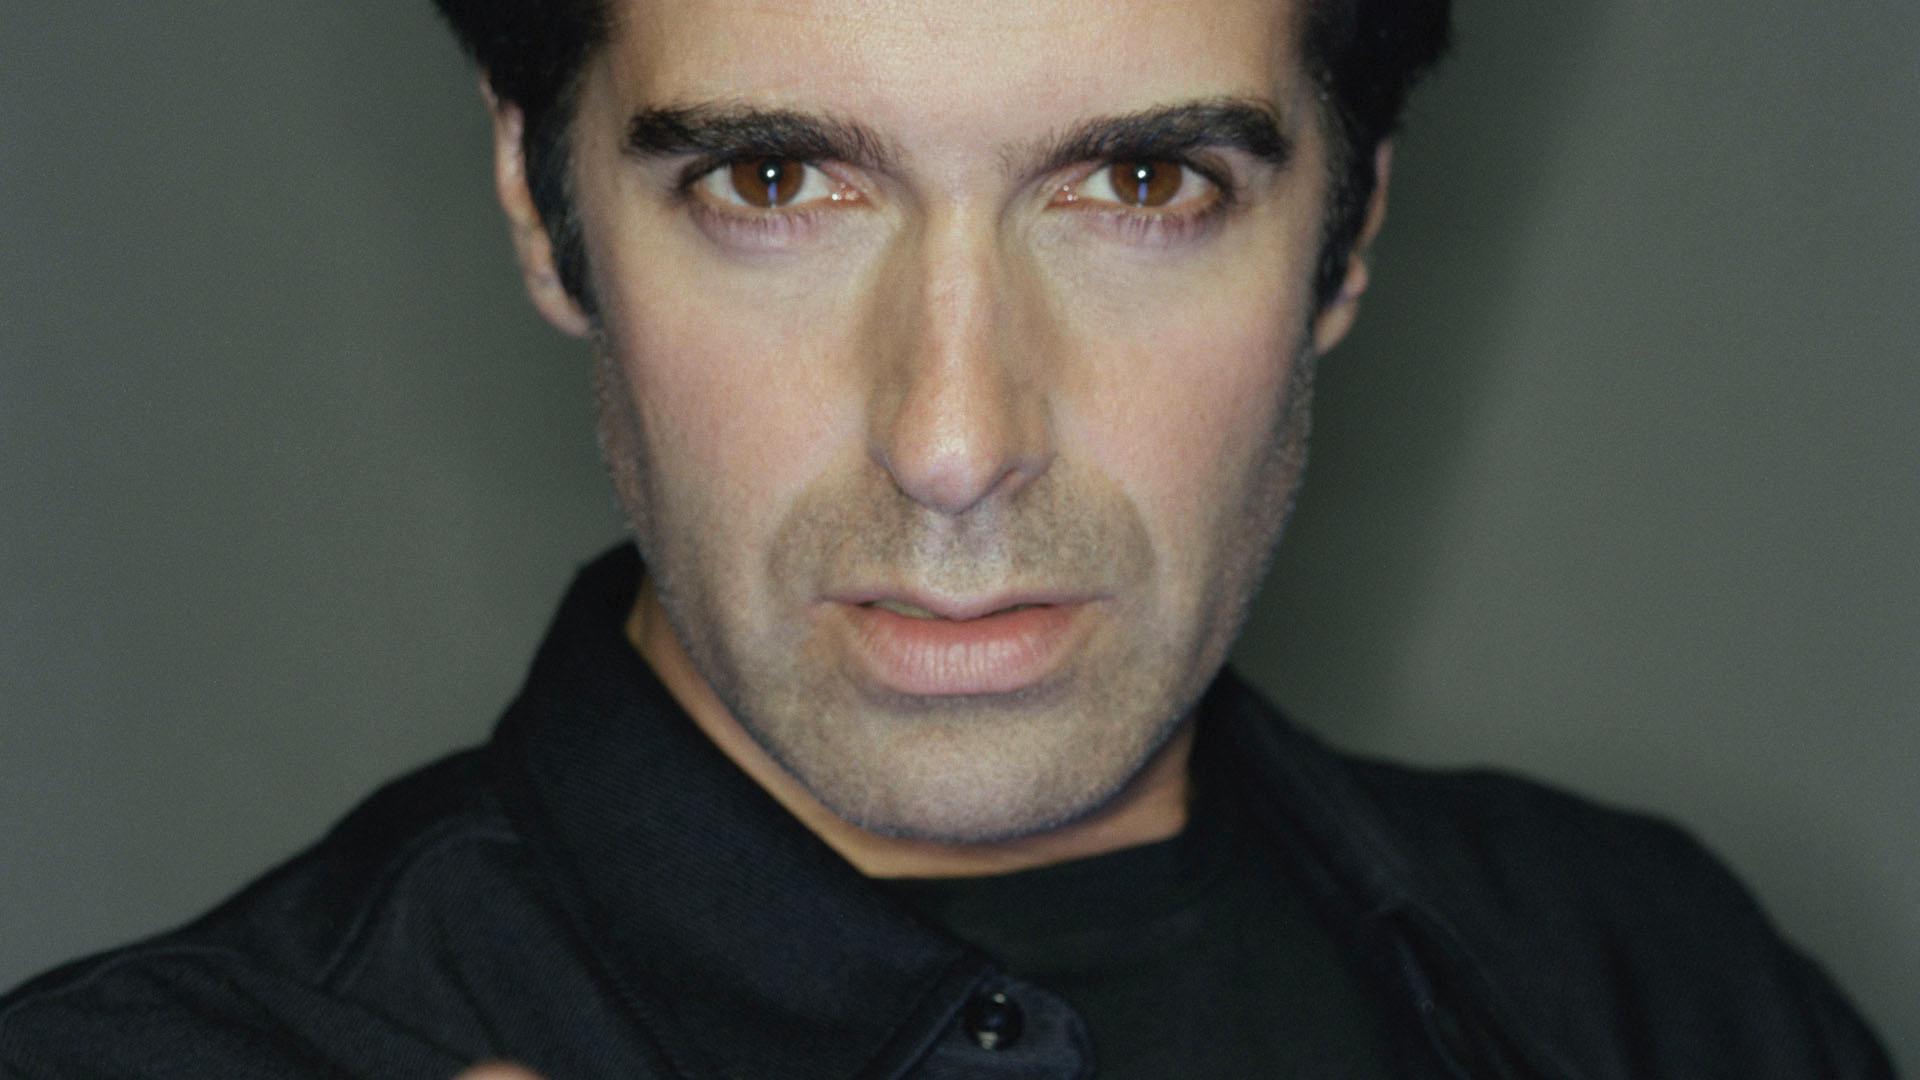 The Magic of David Copperfield